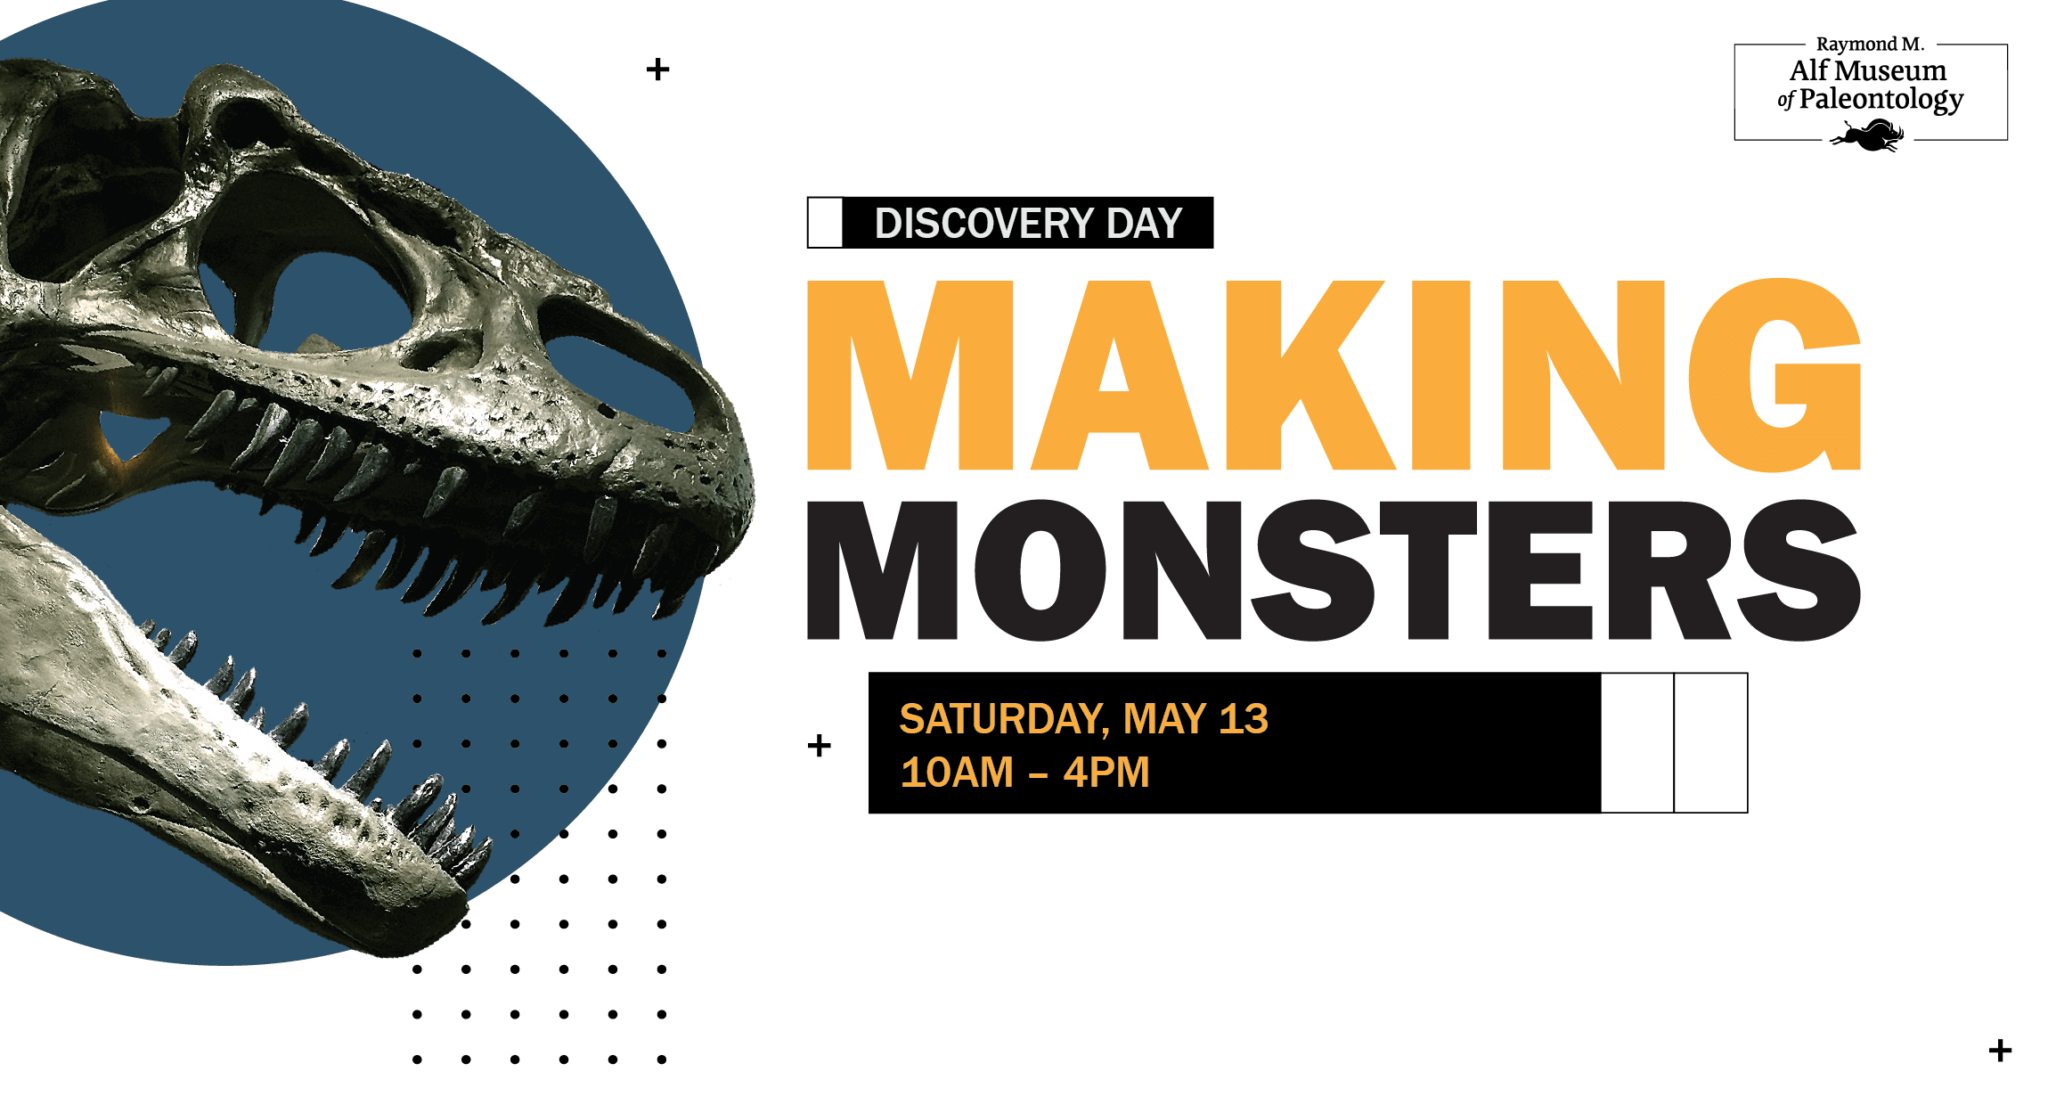 Graphic with text. An allosaurus skull image over a blue circle appears on the left side of the image. The text to the right reads: Discovery Day, Making Monsters, May 13 from 10am - 4pm. 